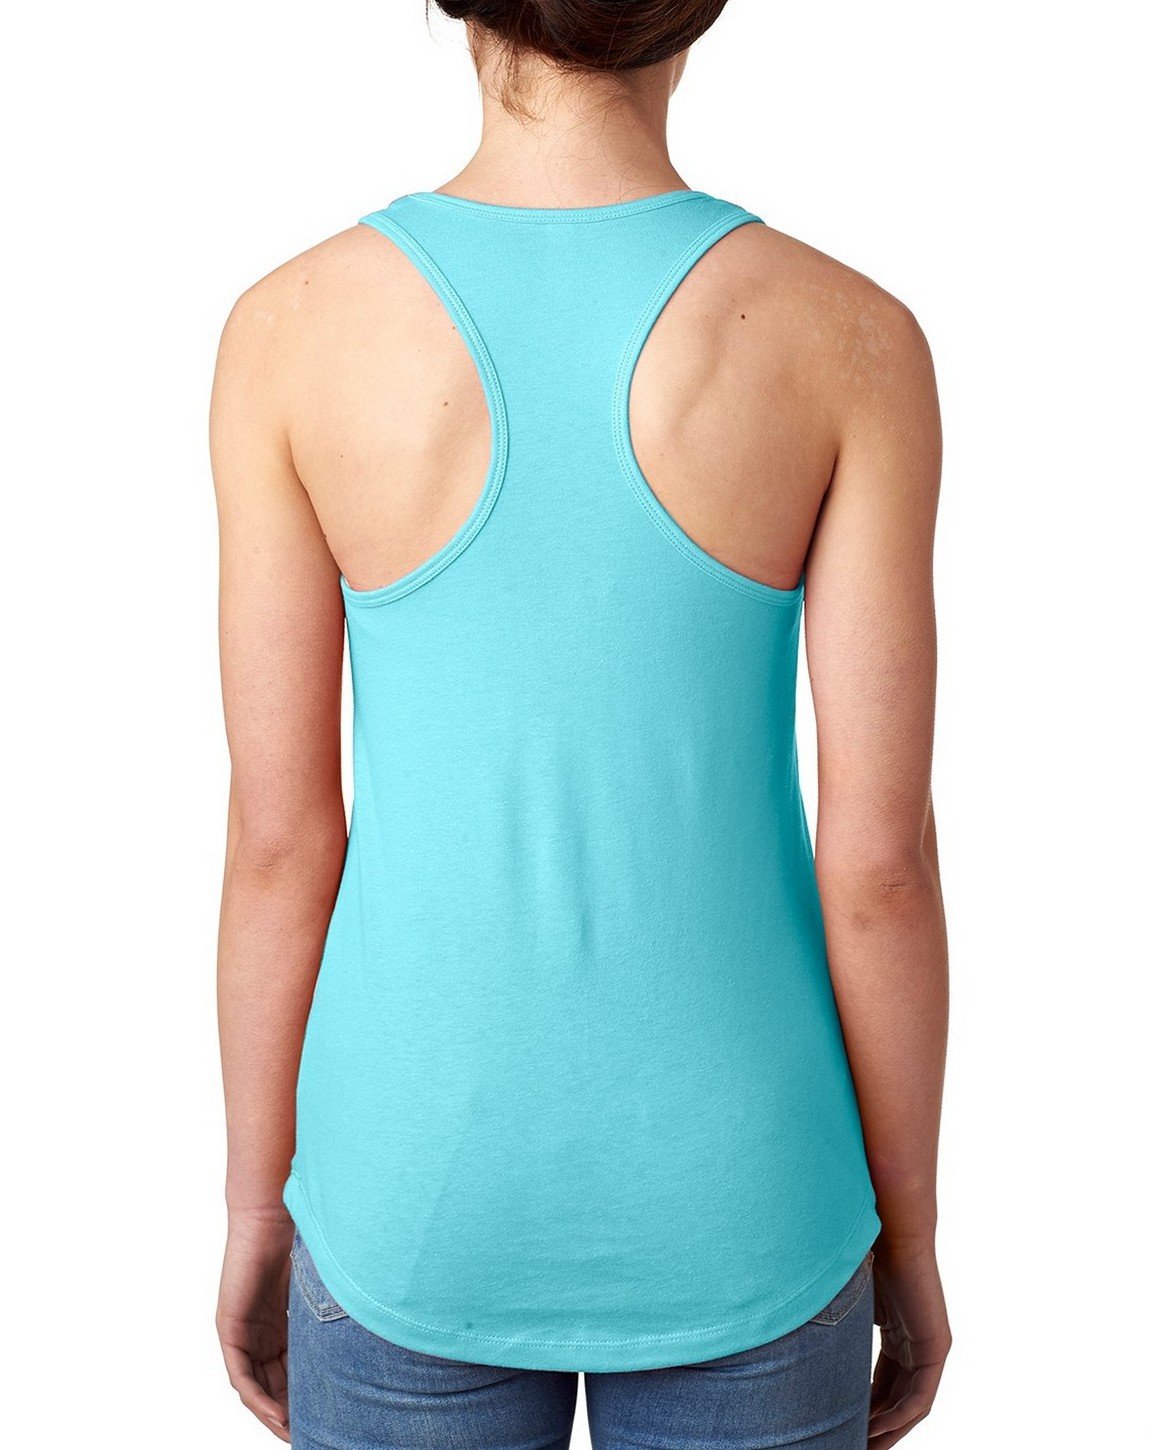 Next Level Ideal Racerback Tank Cancun Small (Pack of 5)